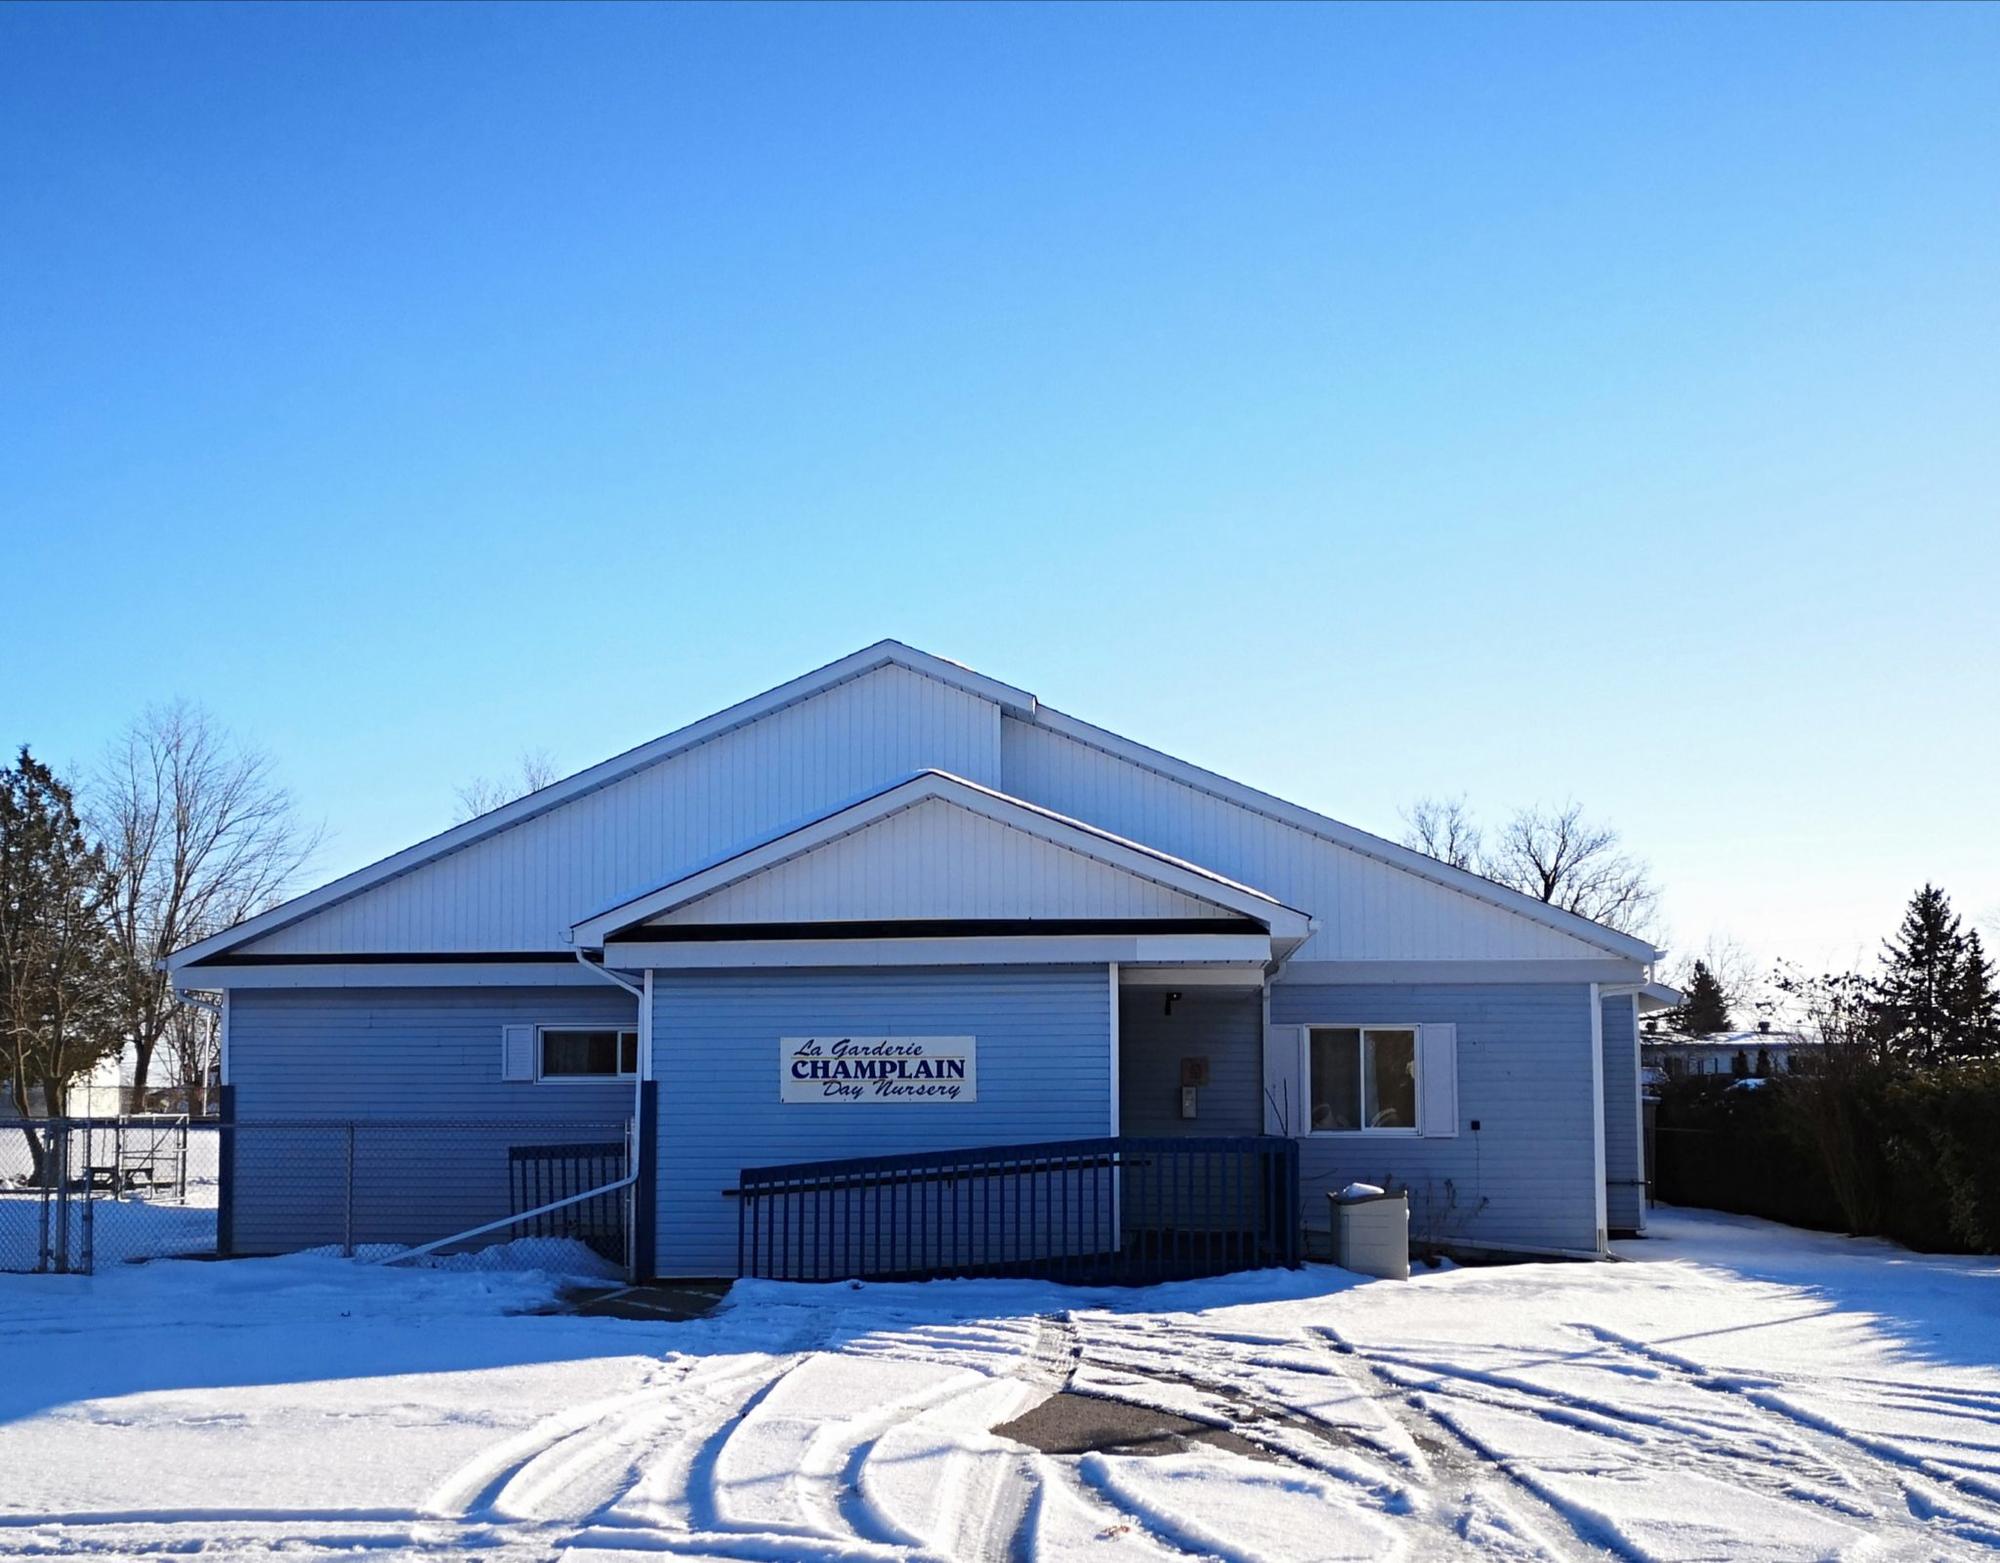 Champlain day care building declared surplus; building might be sold